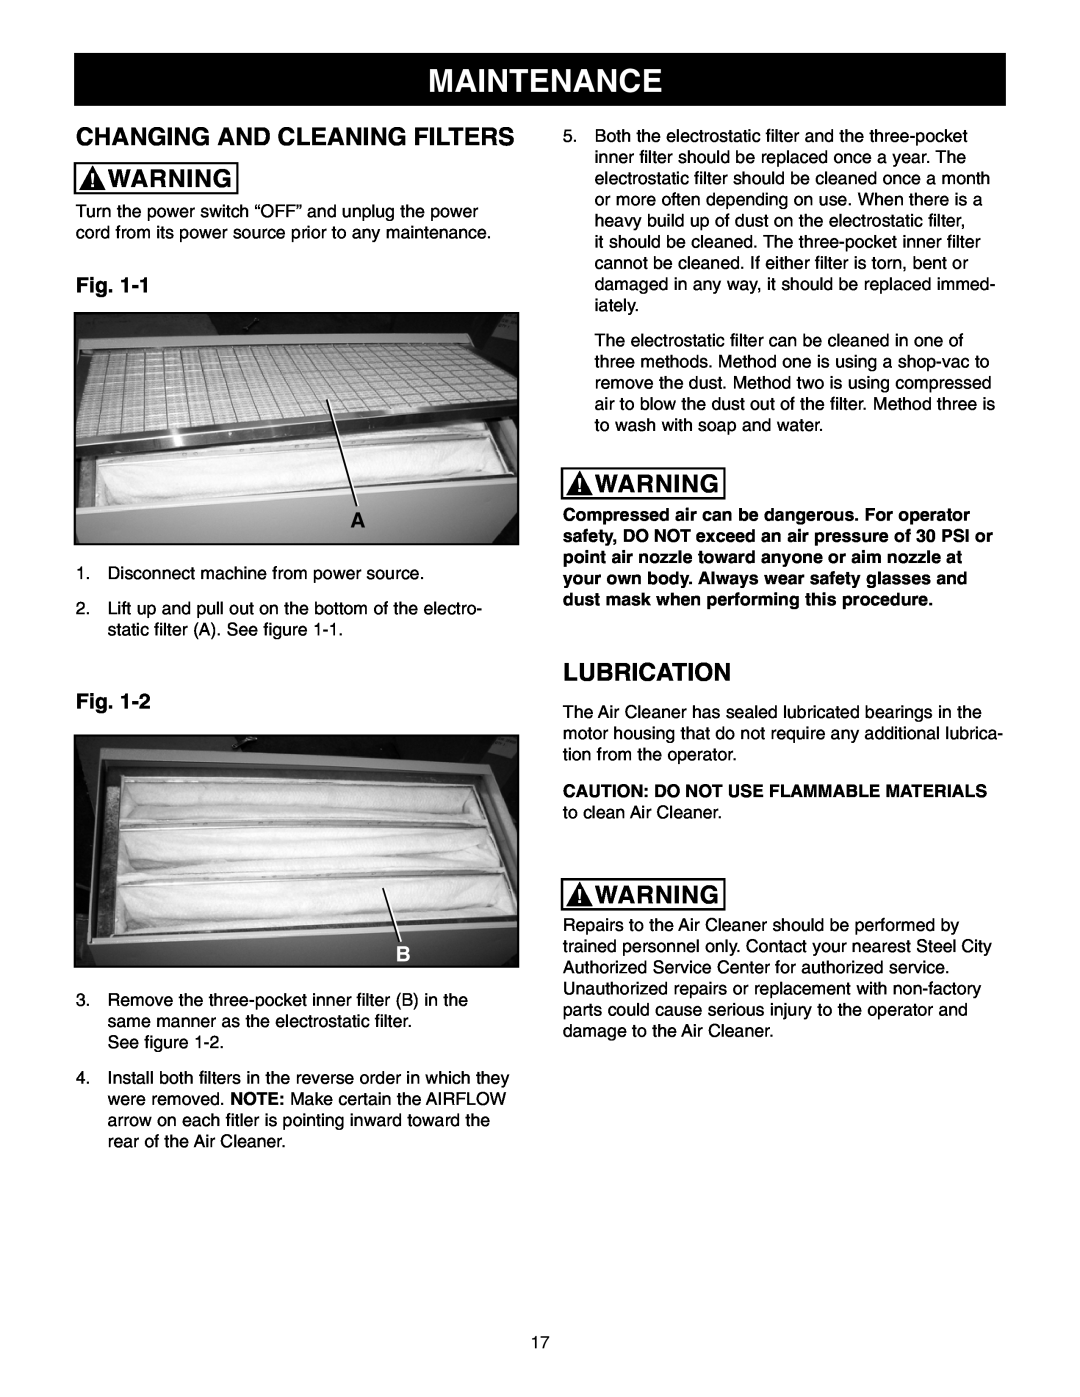 Craftsman 65100 user manual Maintenance, Changing And Cleaning Filters, Lubrication 